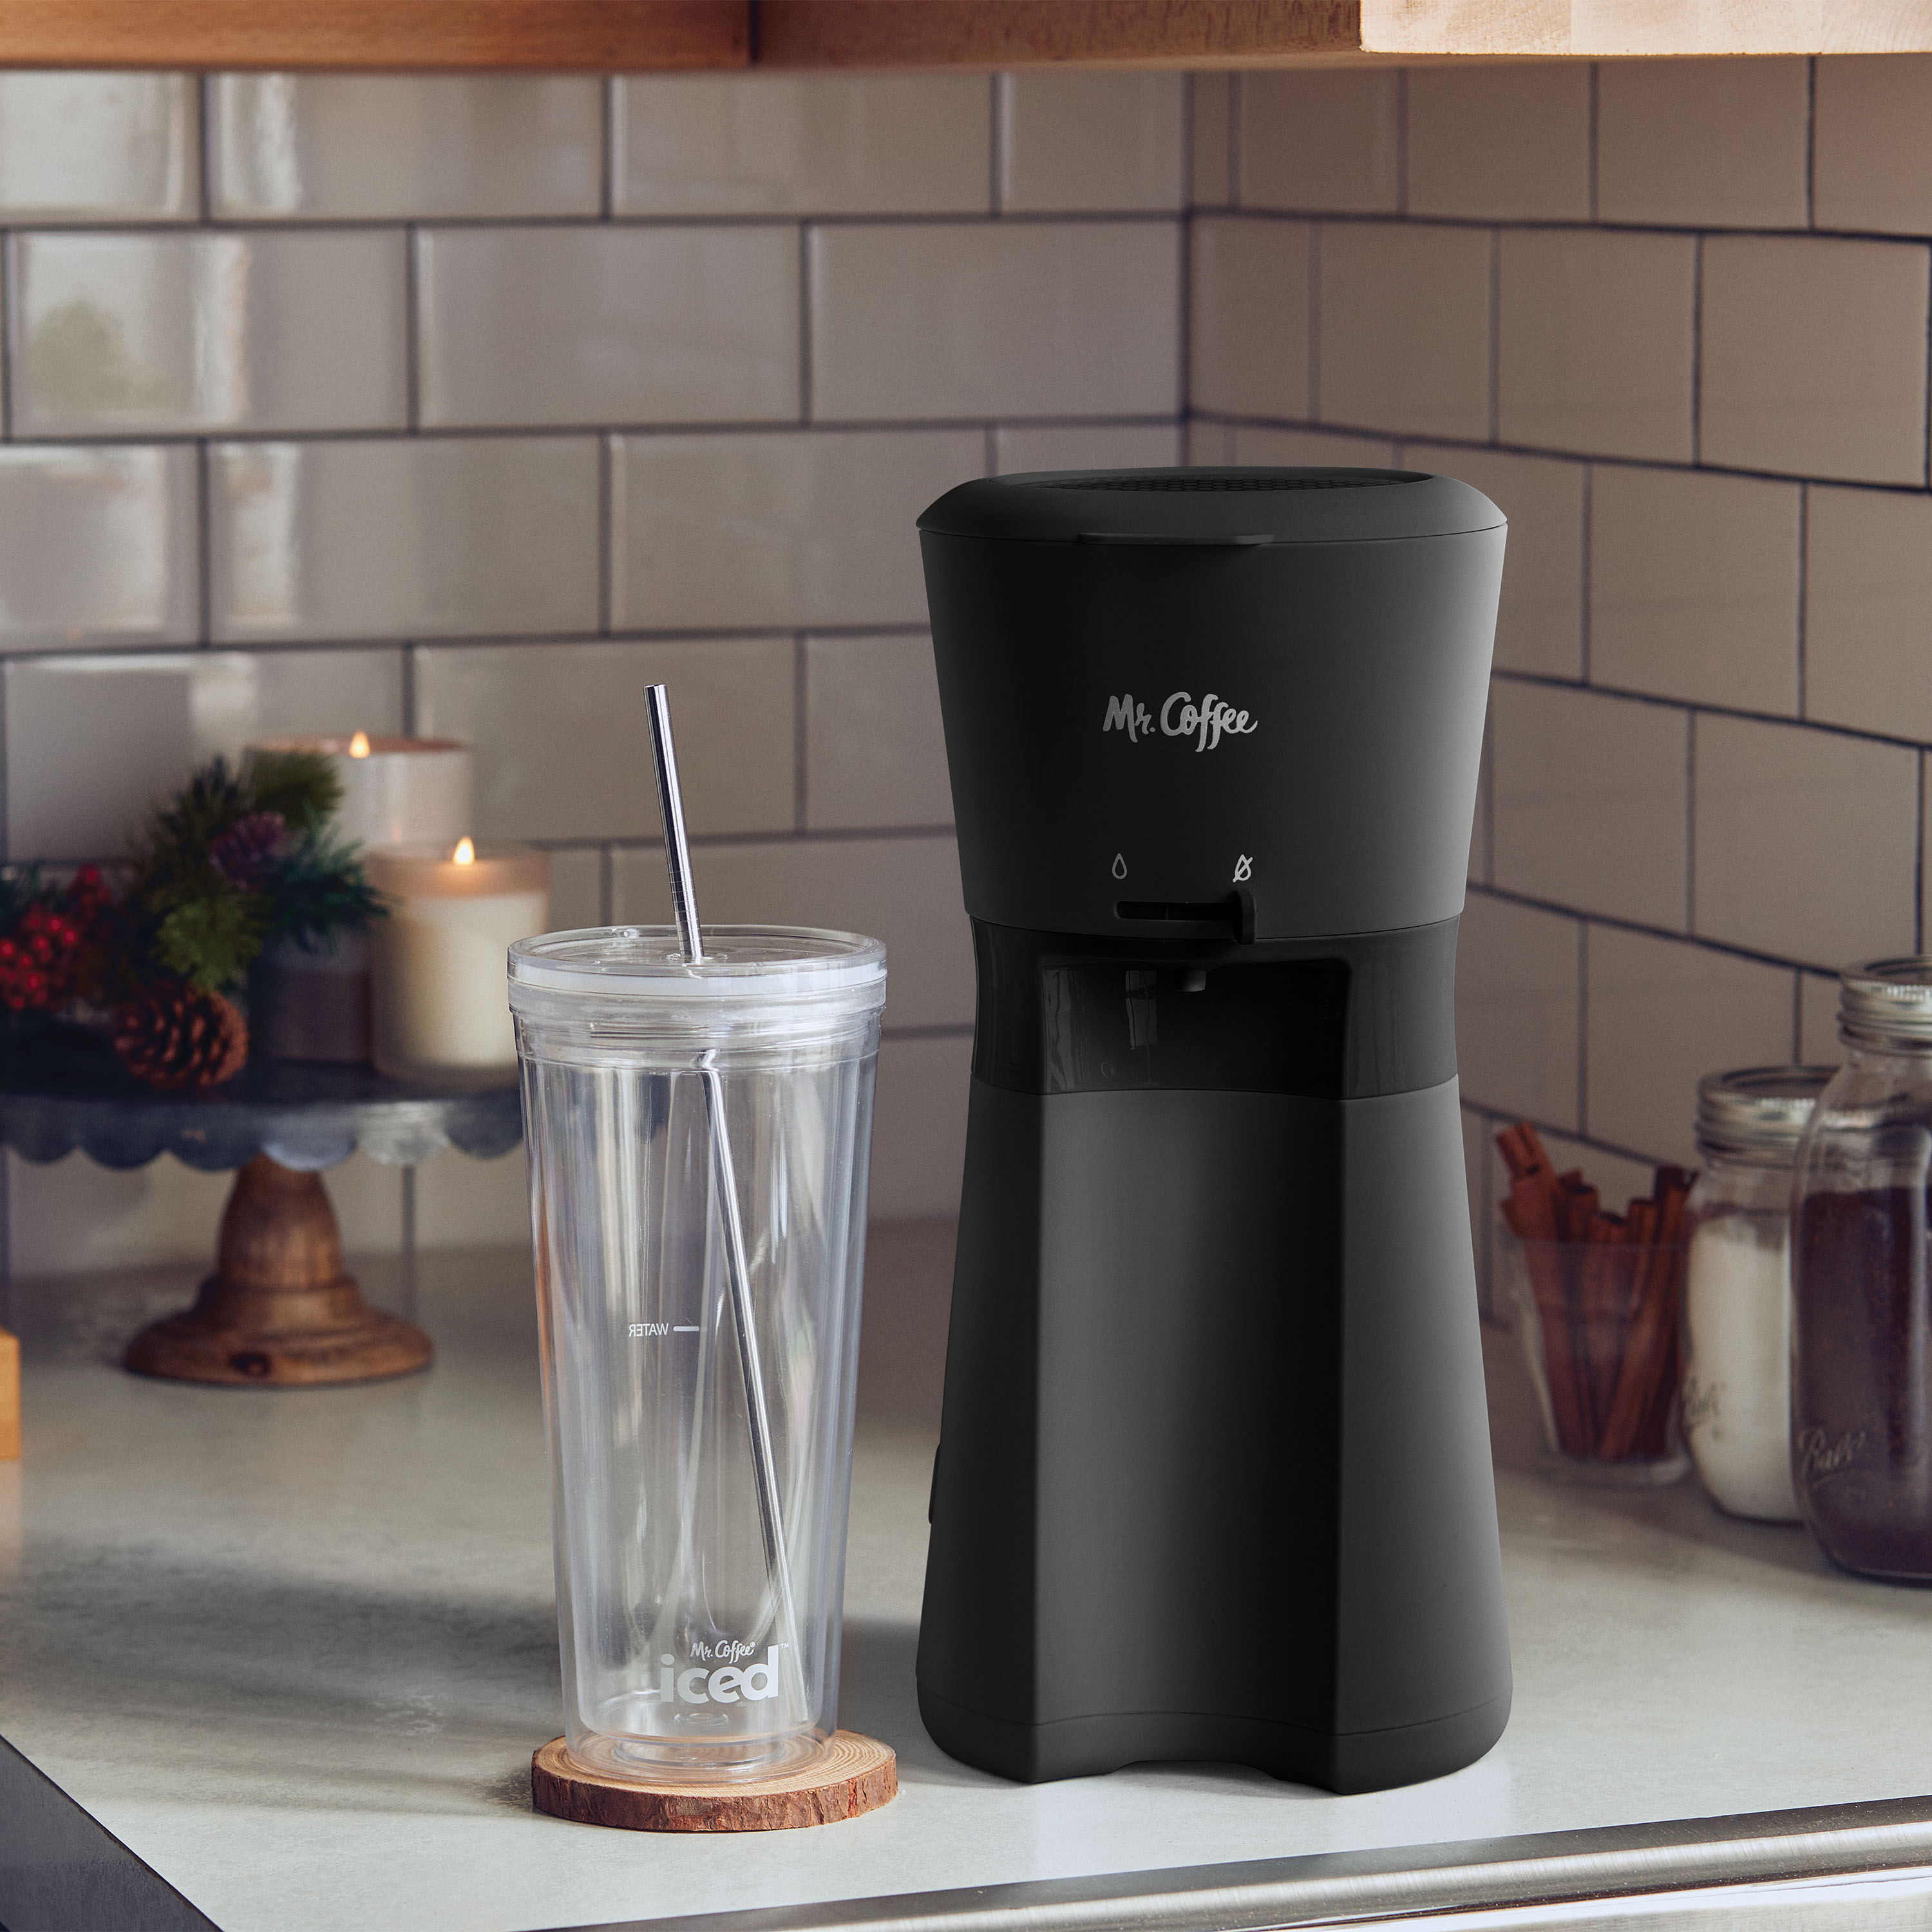 Mr. Coffee® Iced™ Coffee Maker with Reusable Tumbler and Filter, Black - image 3 of 8